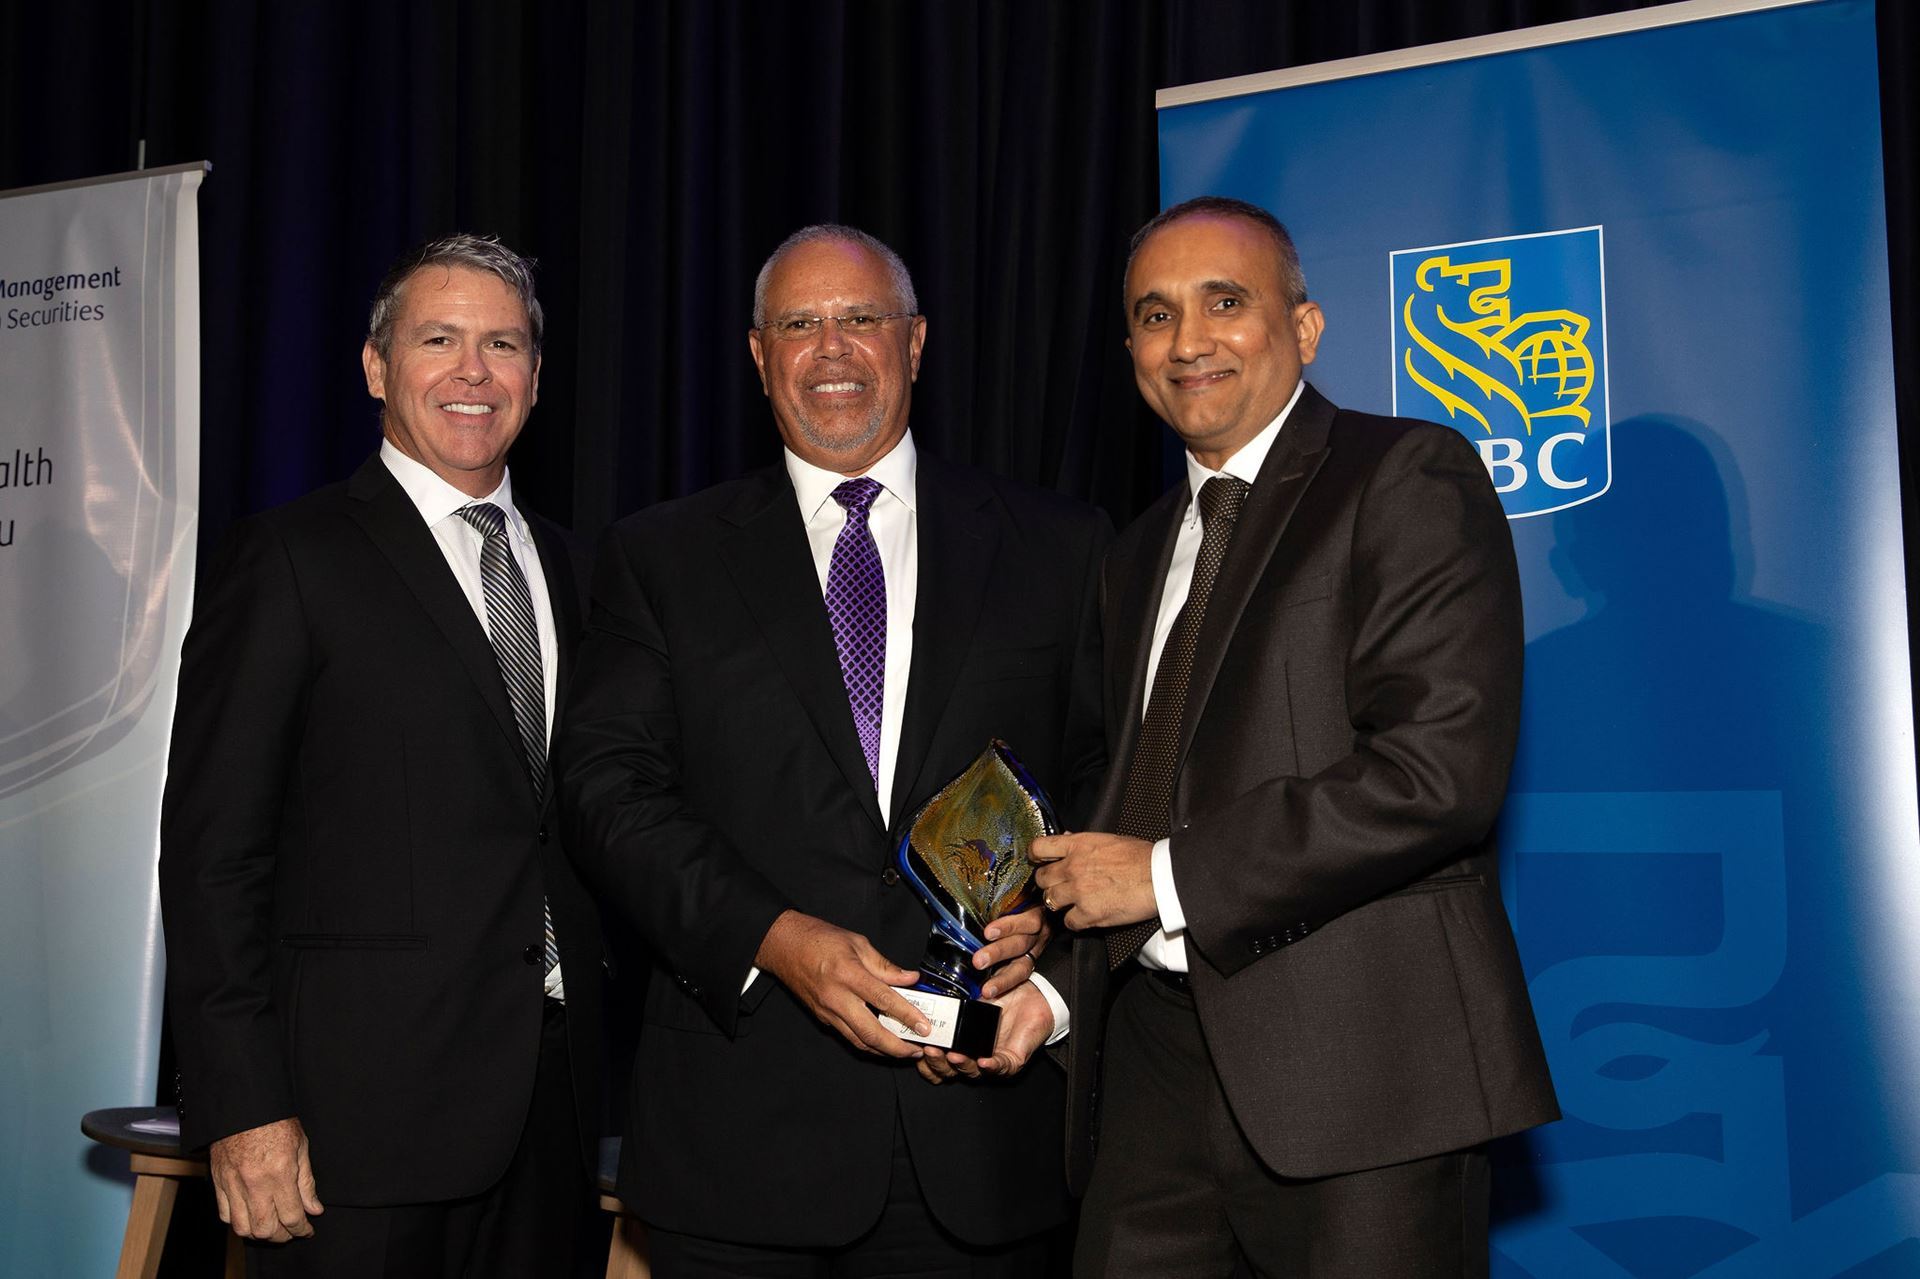 CIIPA President Rennie Khan, right, and Managing Director of RBC Wealth Management Andrew McCartney, left, present the Pioneer Award to recipient Layman Daniel “Dan” Scott during the 15th-annual CIIPA Awards Gala Saturday night (30 Sept.) at the Kimpton Seafire Resort + Spa.